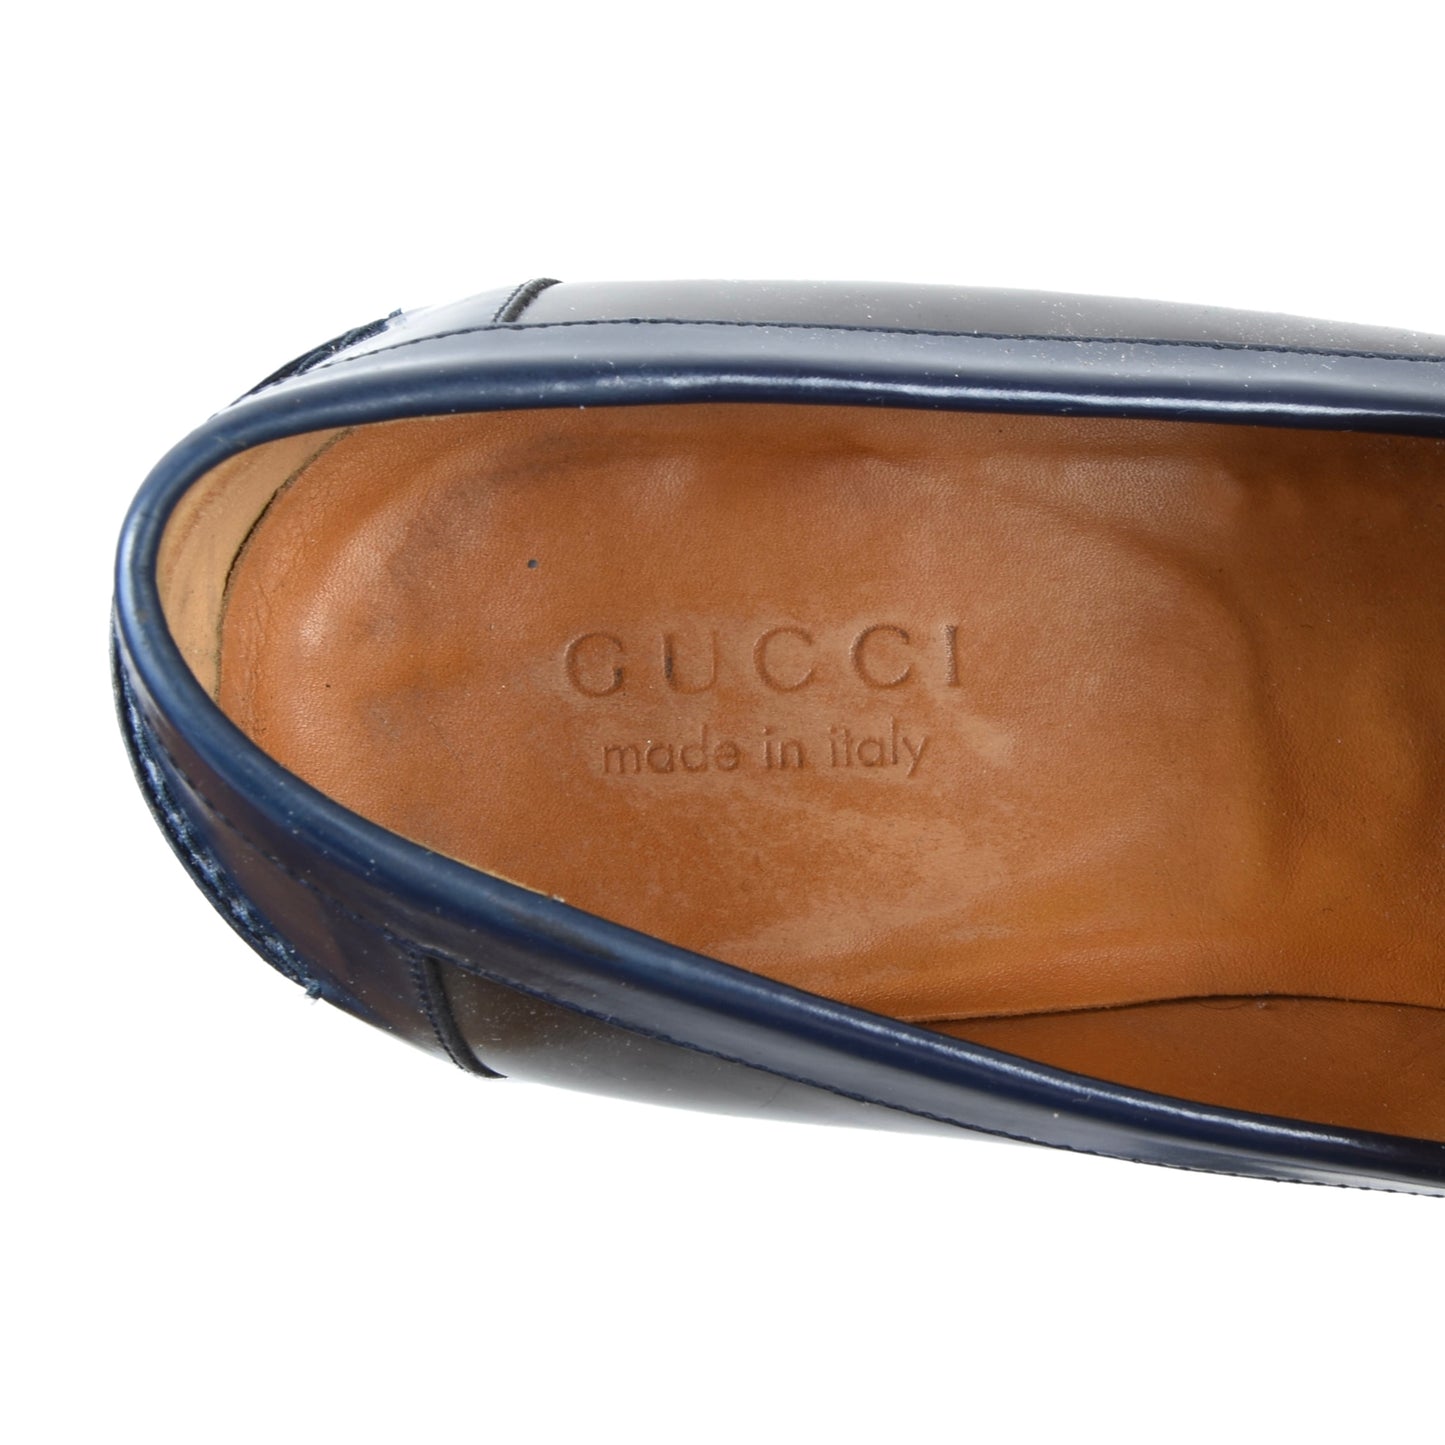 Gucci Leather Loafers/Shoes Size 43 1/2E - Brown & Bluw